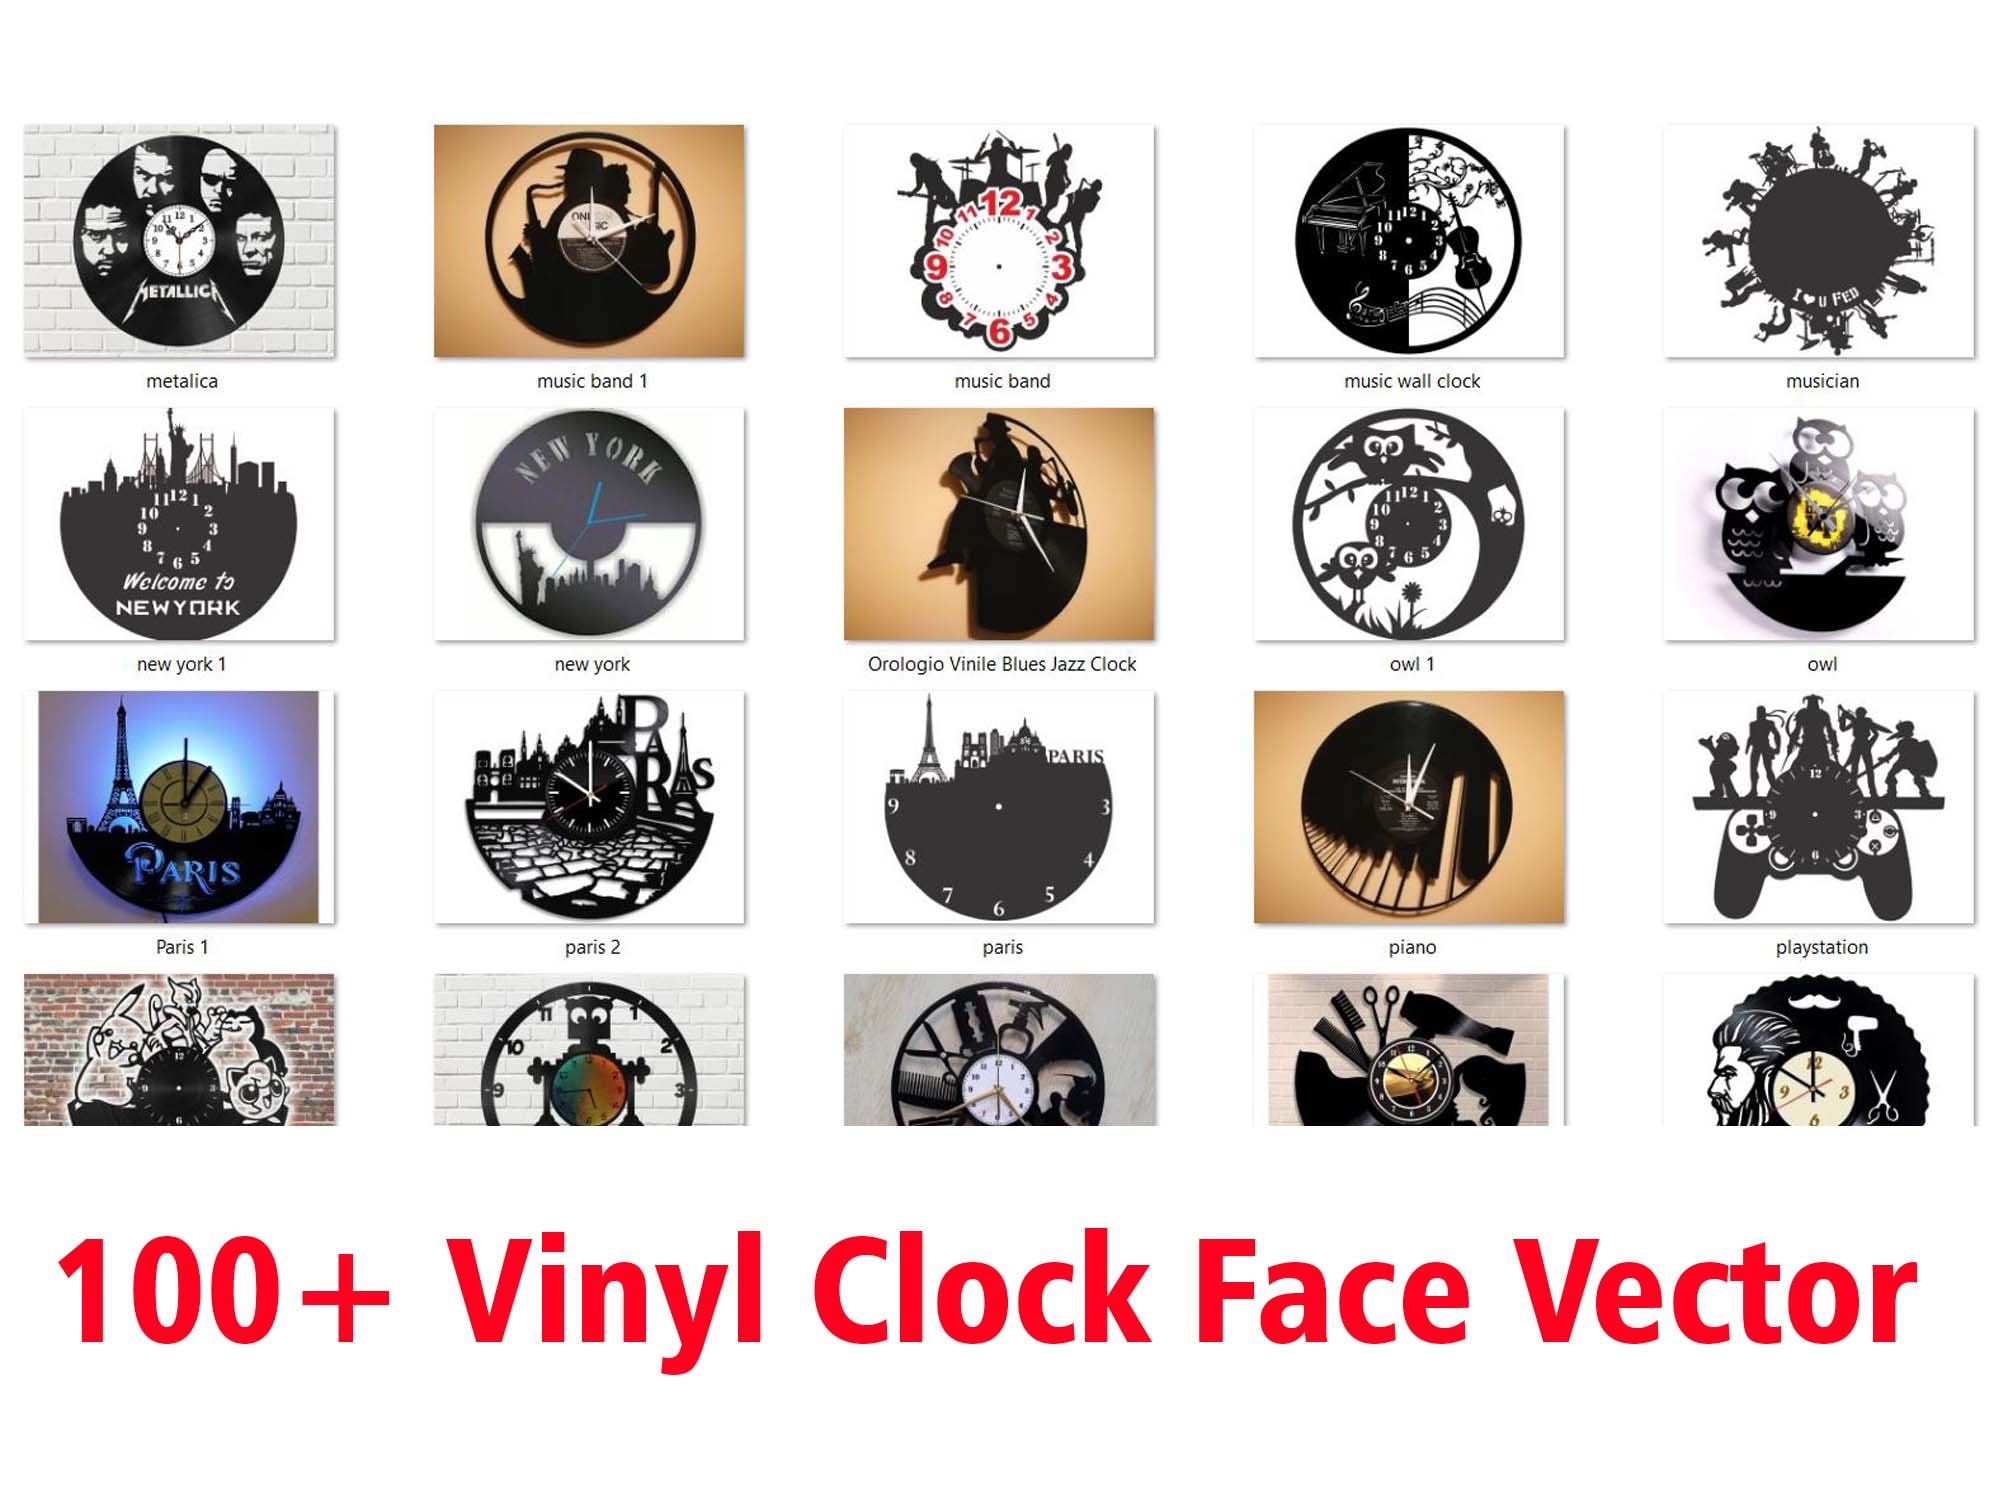 Vinyl Roll Holder, Laser Cut Files, Perfect for Optimizing Storage Spaces  for Vinyl Rolls Svg, Eps, Dxf, Cdr, Glowforge Files Plans Vector 